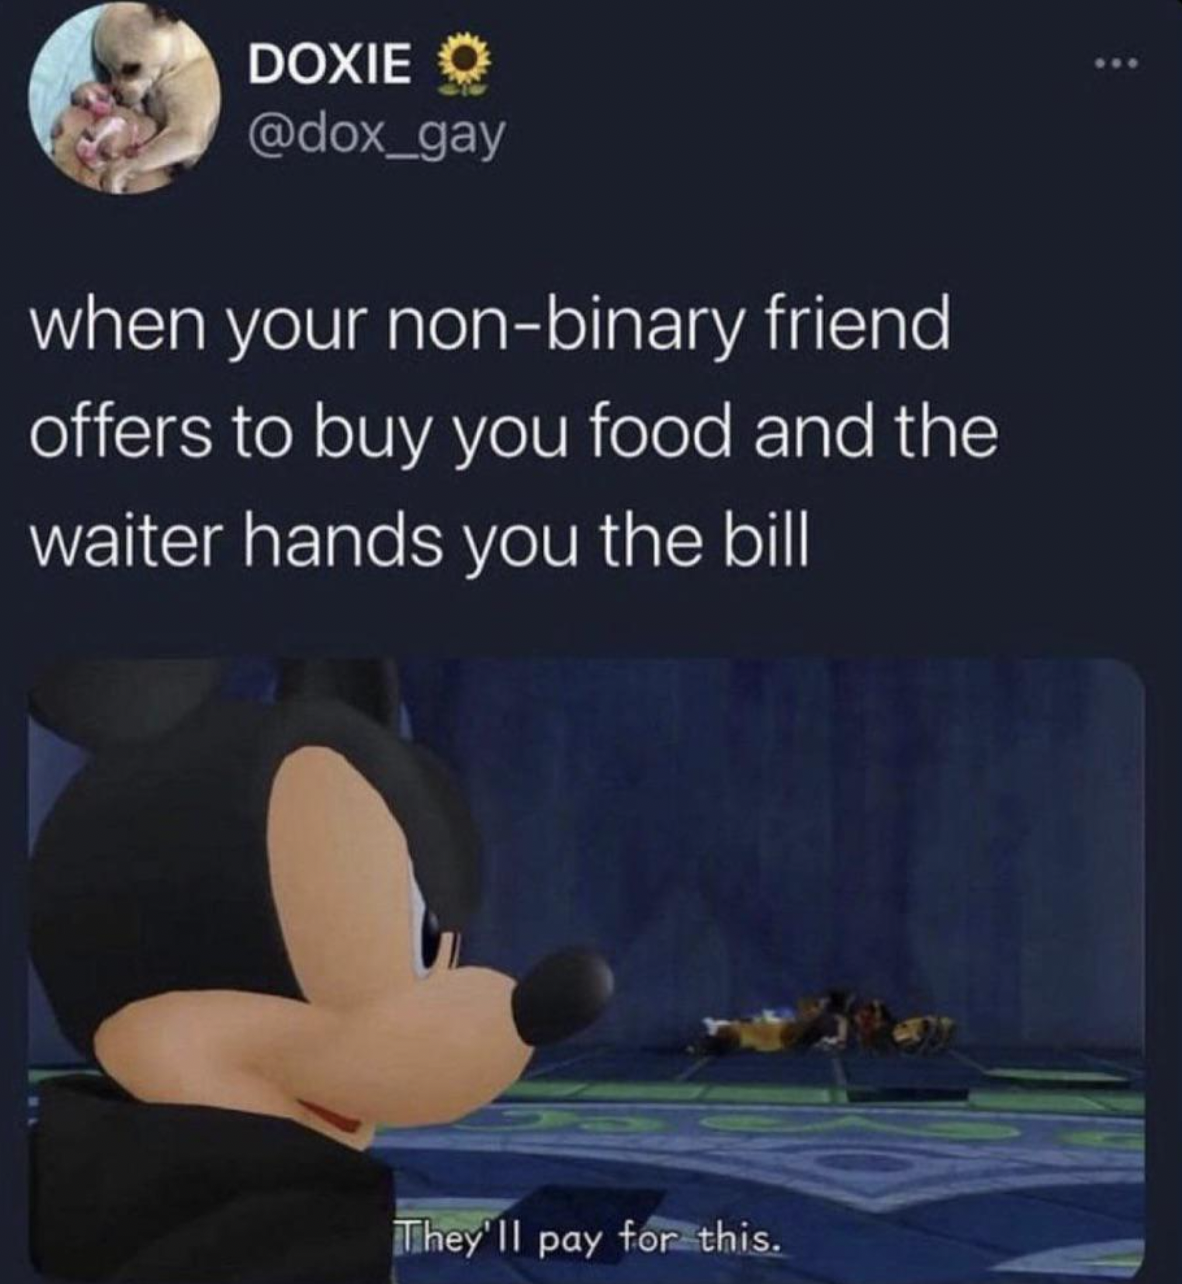 Anti-Memes - Tell the Truth - mickey they ll pay - Doxie O when your nonbinary friend offers to buy you food and the waiter hands you the bill They'll pay for this.